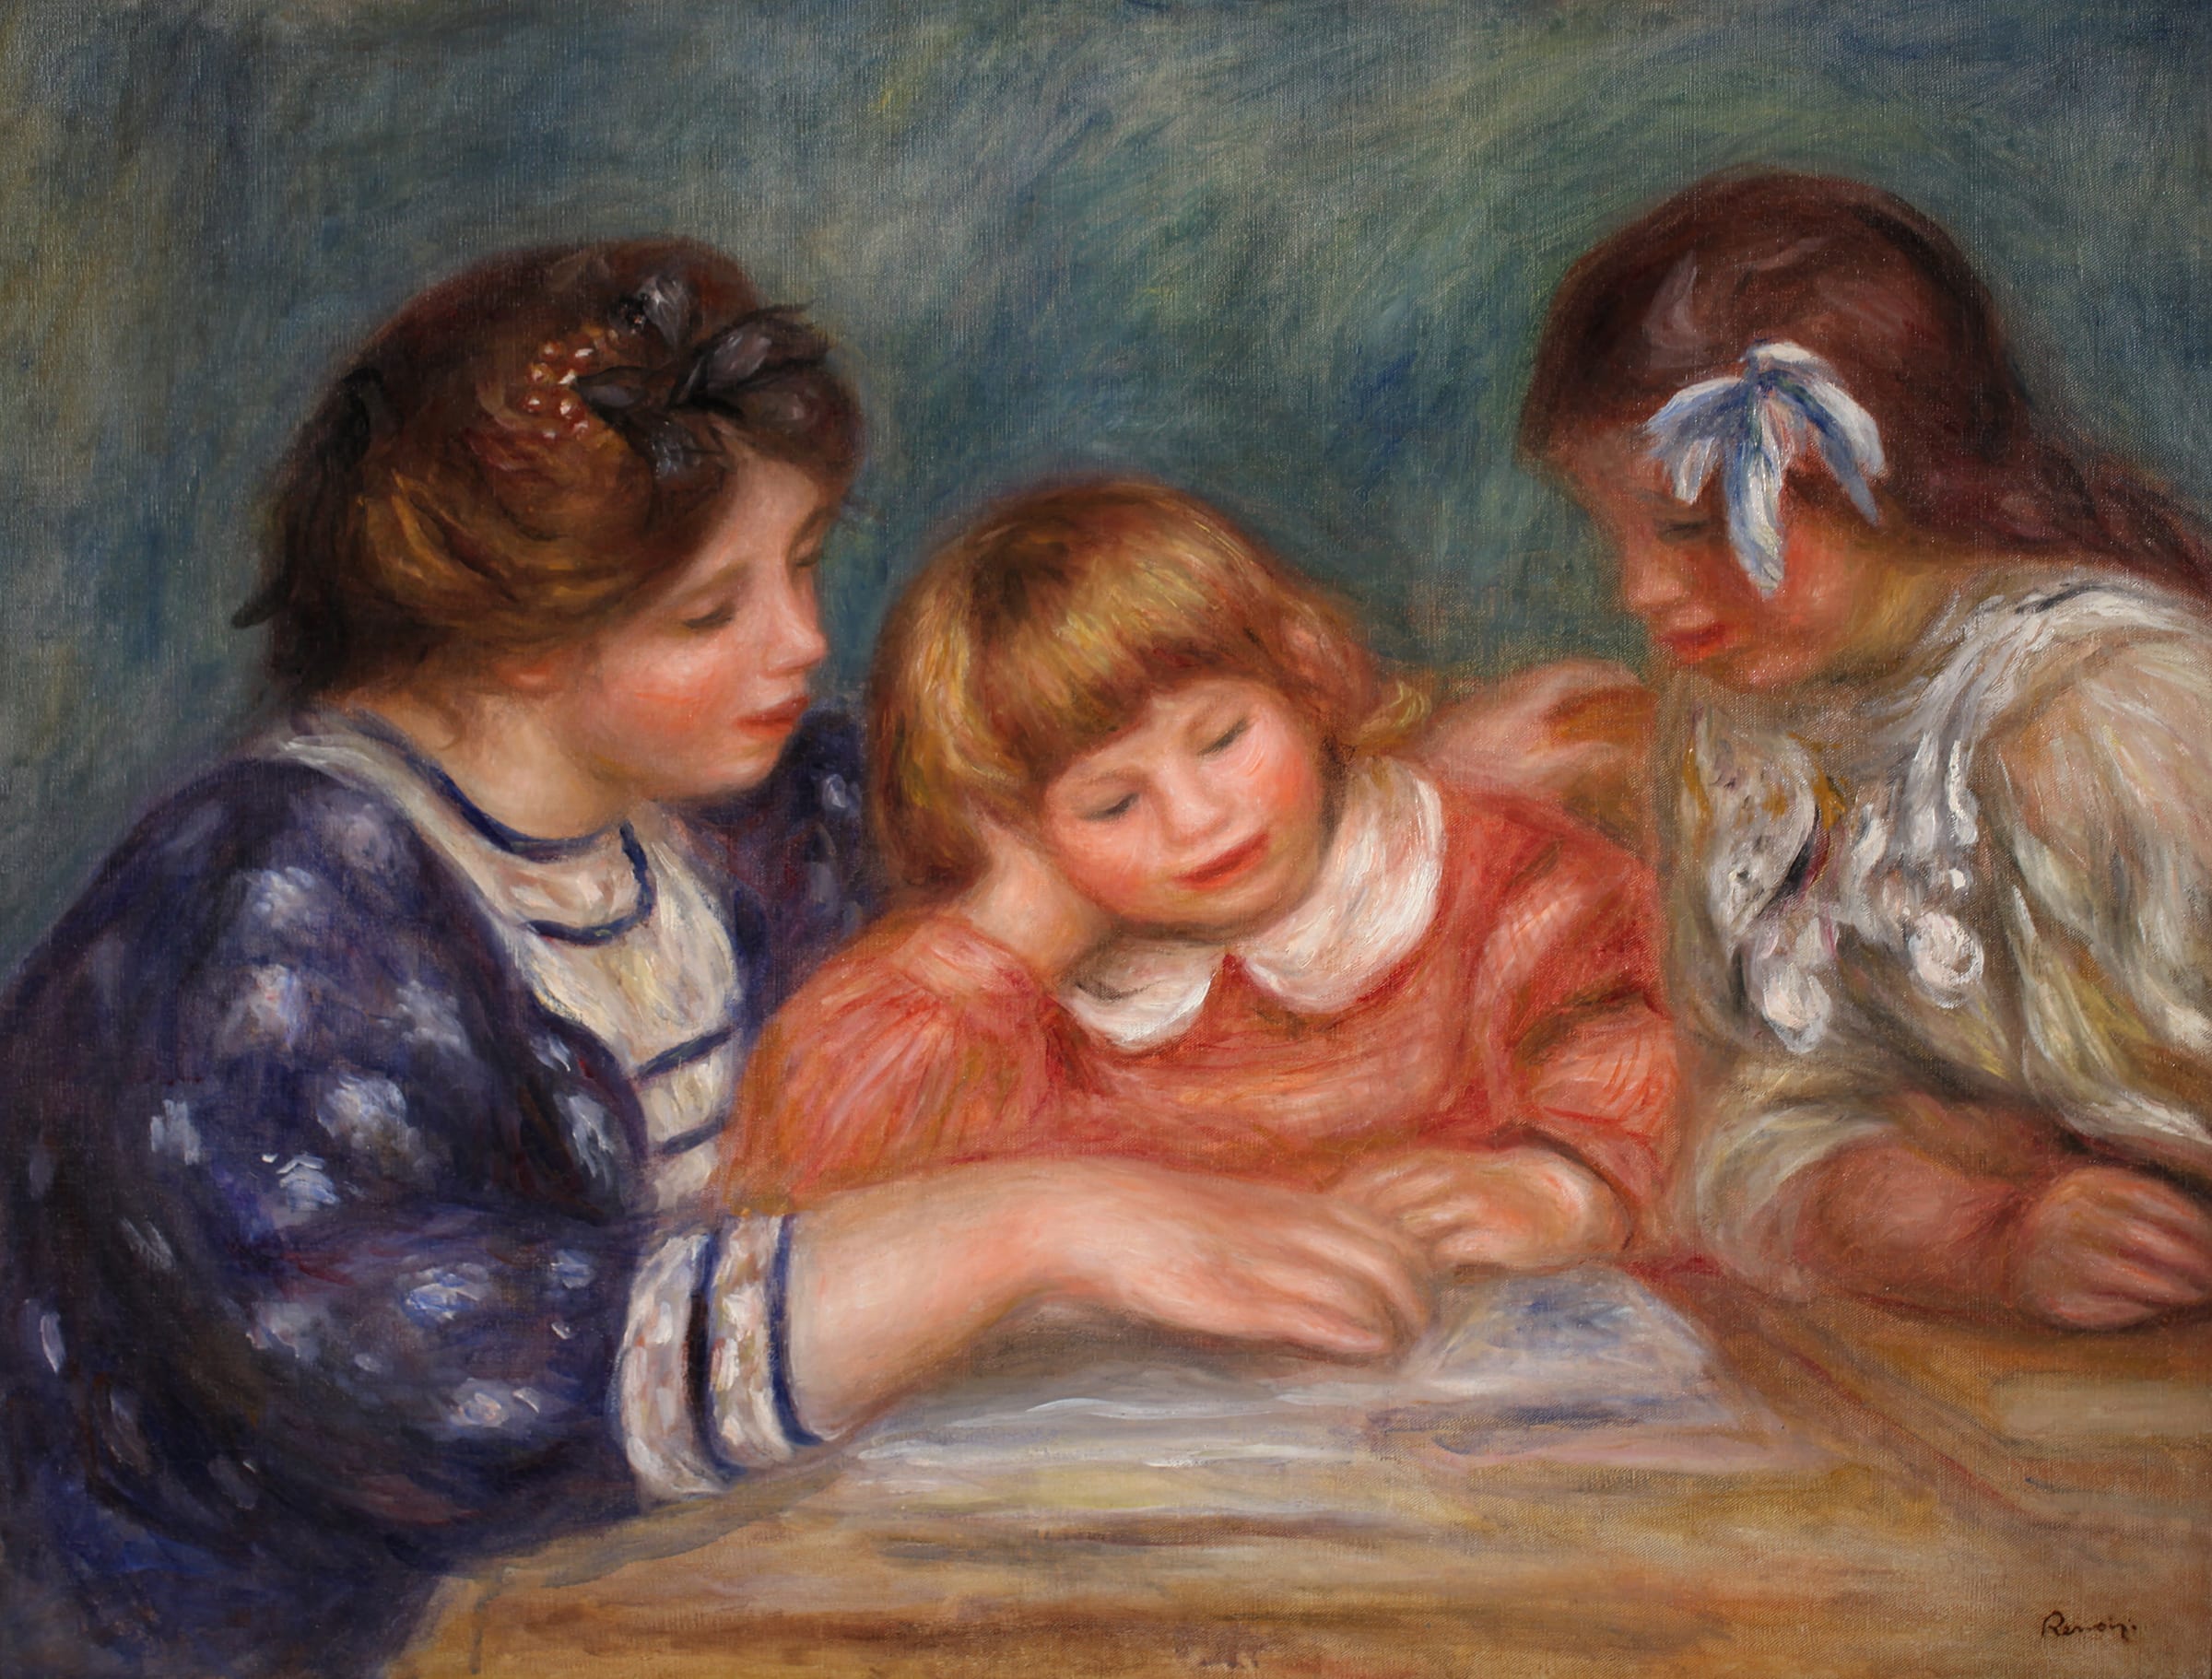 Pierre-Auguste Renoir, La leçon (Bielle, l'institutrice et Claude Renoir lisant), 1906. Presented at Art Basel Hong Kong and in 'OVR: Hong Kong' by Helly Nahmad Gallery (New York). Courtesy of Helly Nahmad Gallery.